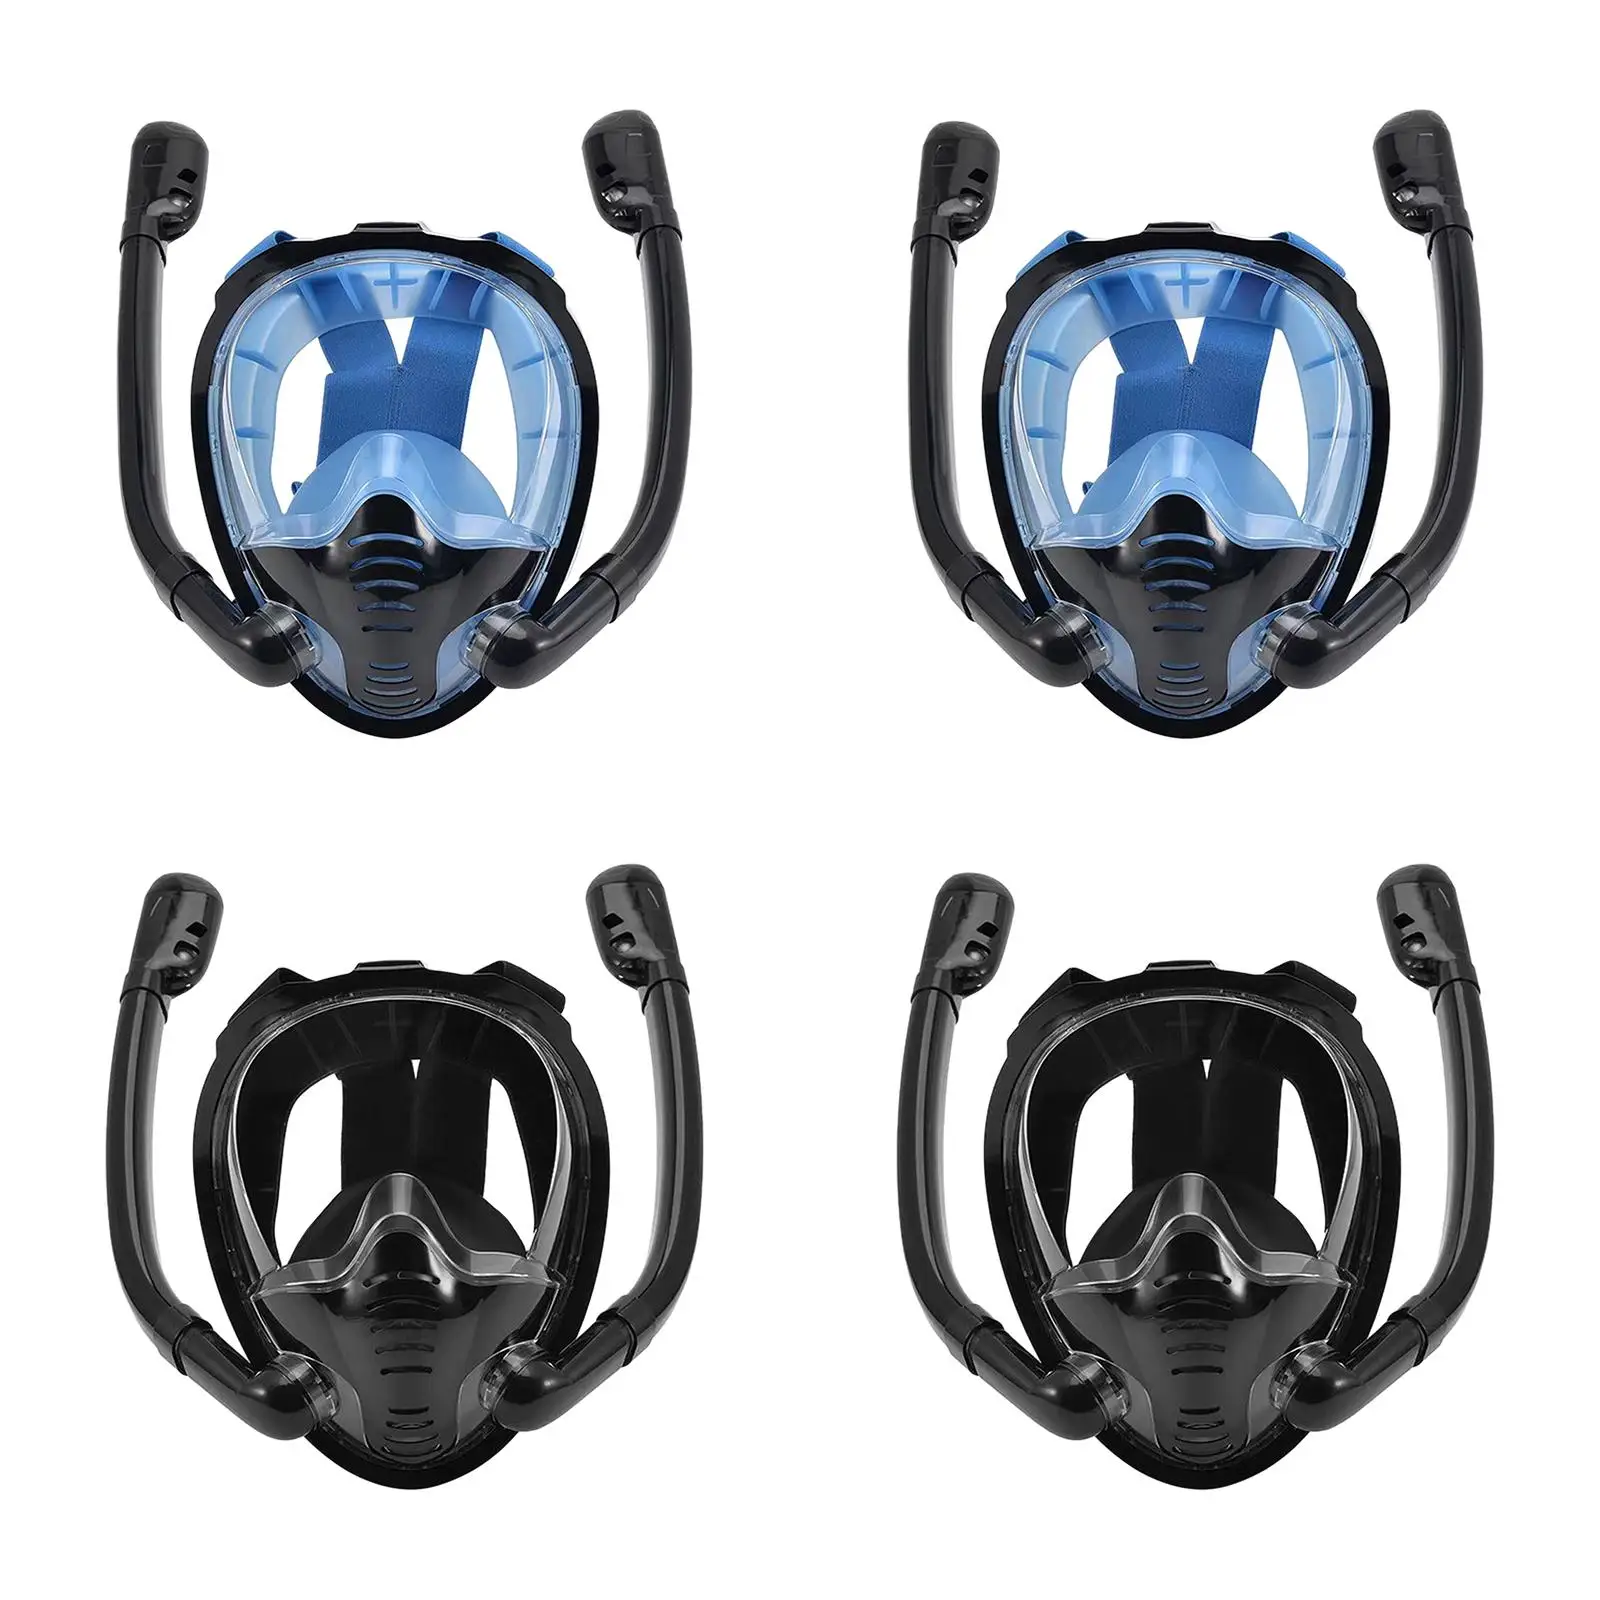 Snorkeling Mask Snorkel Mask Double Tube Swimming Goggles Durable Professional with Camera Mount 180° Wide View Swimming Mask